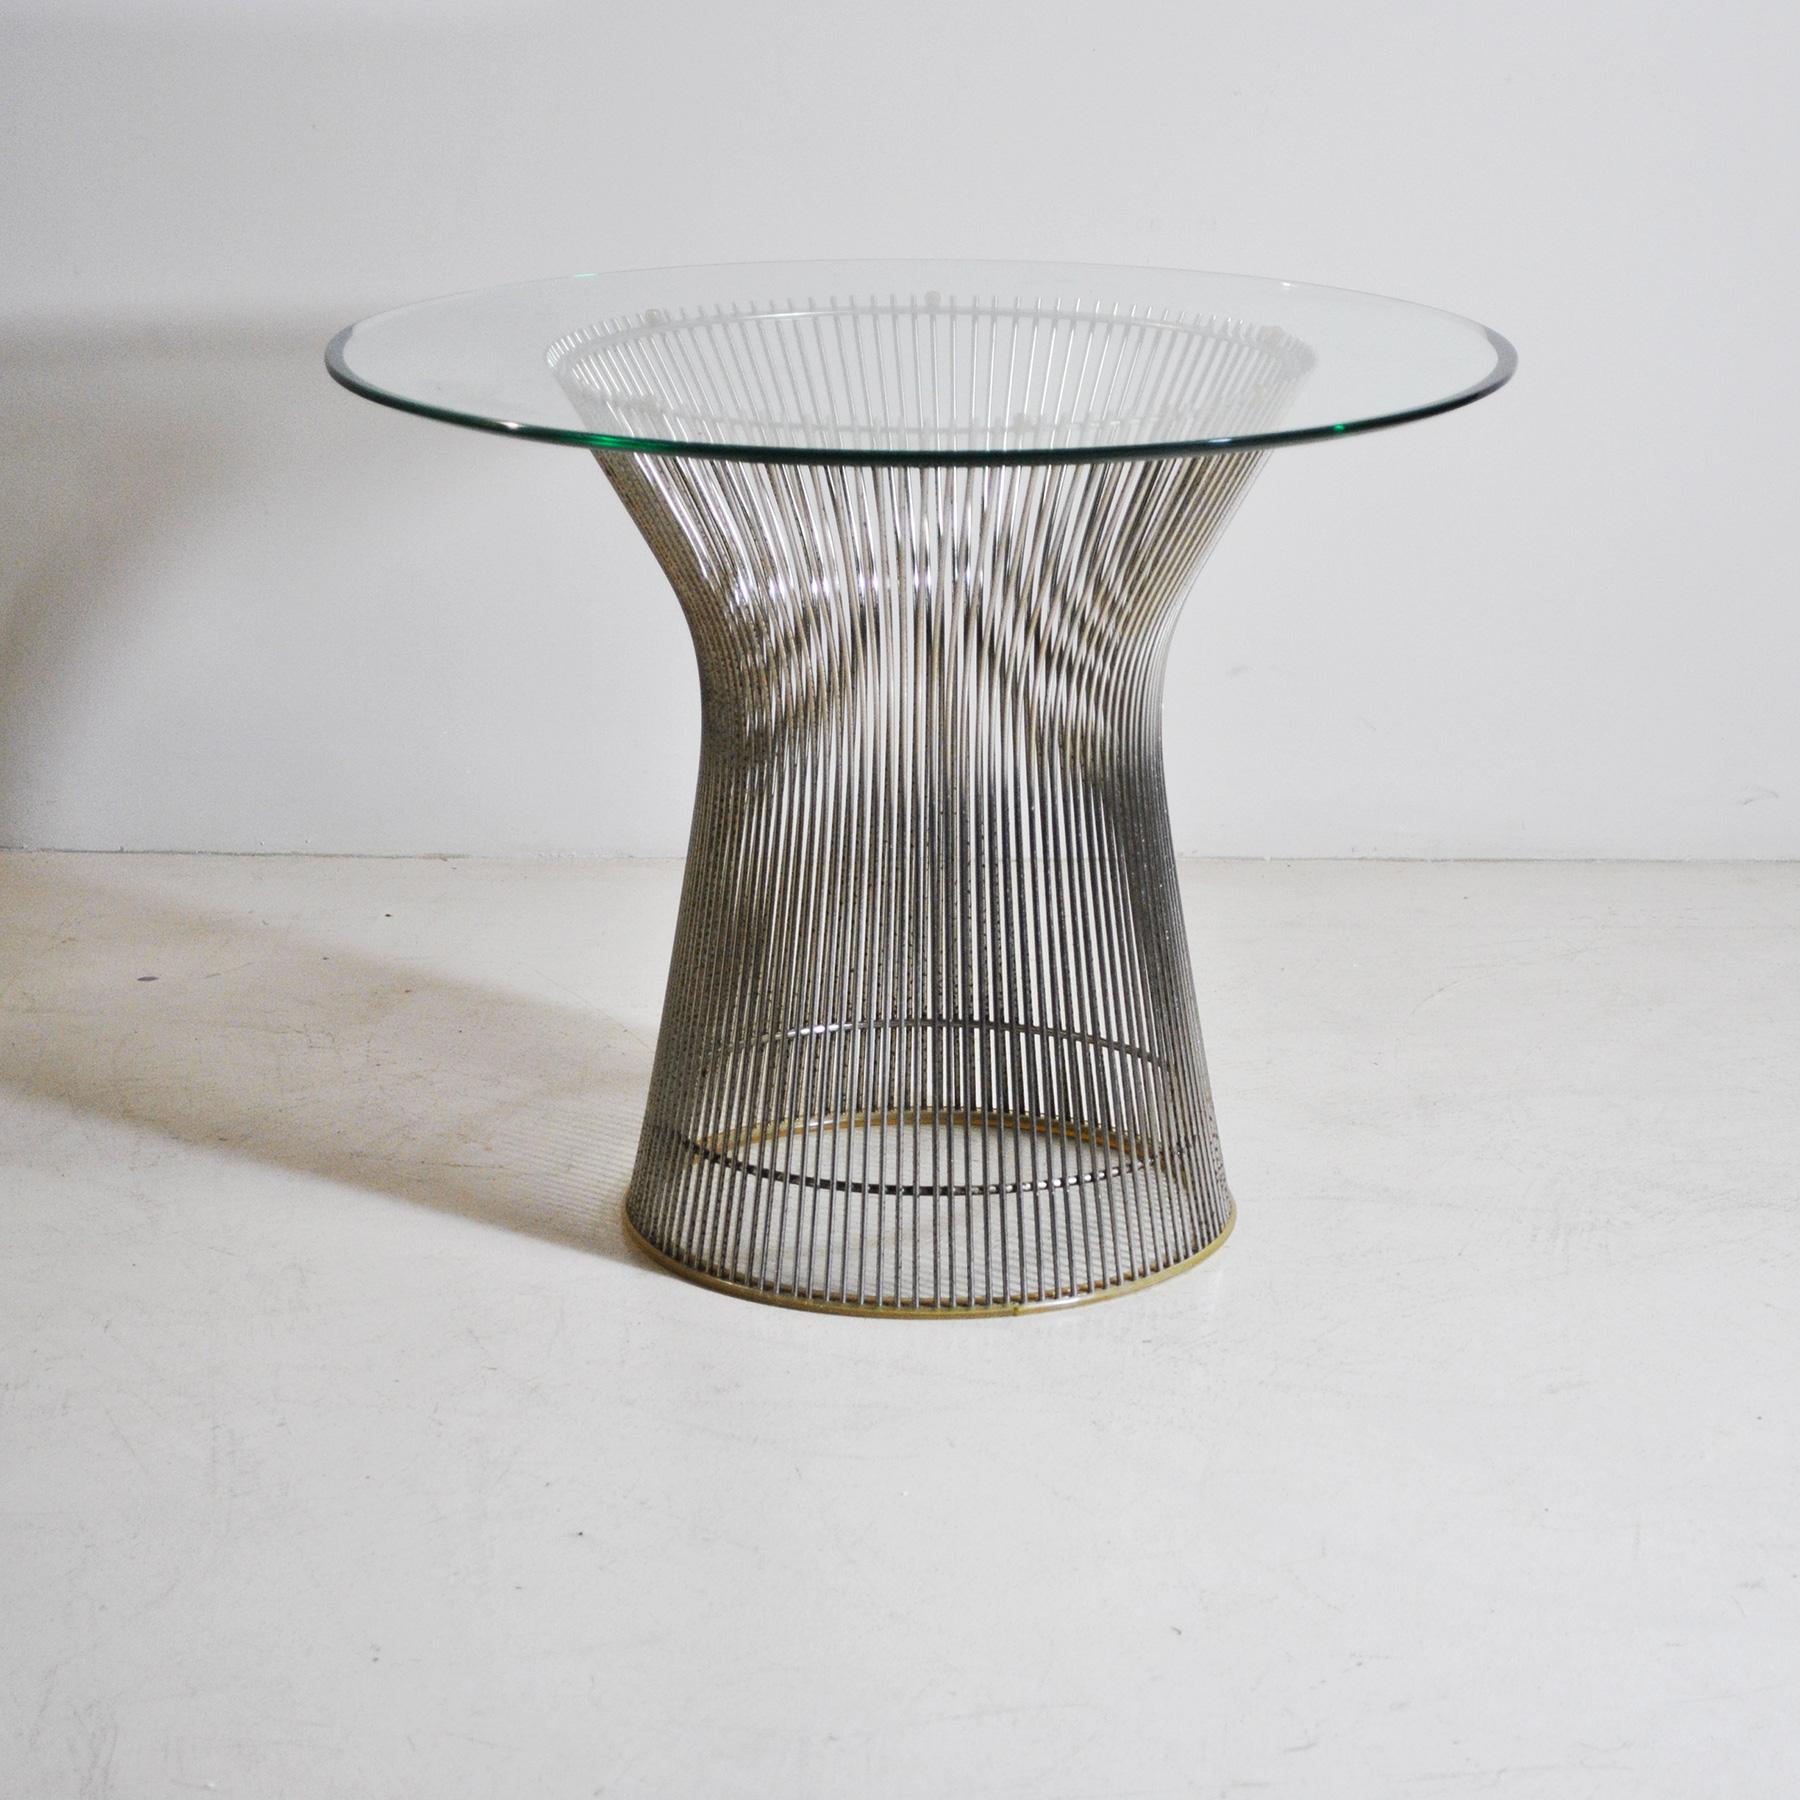 Side table from Knoll's Warren Platner collection in 1962, the coffee table displays Platner's industrial materials well married with graceful organic design. The table is built with ground glass top and chromed base.